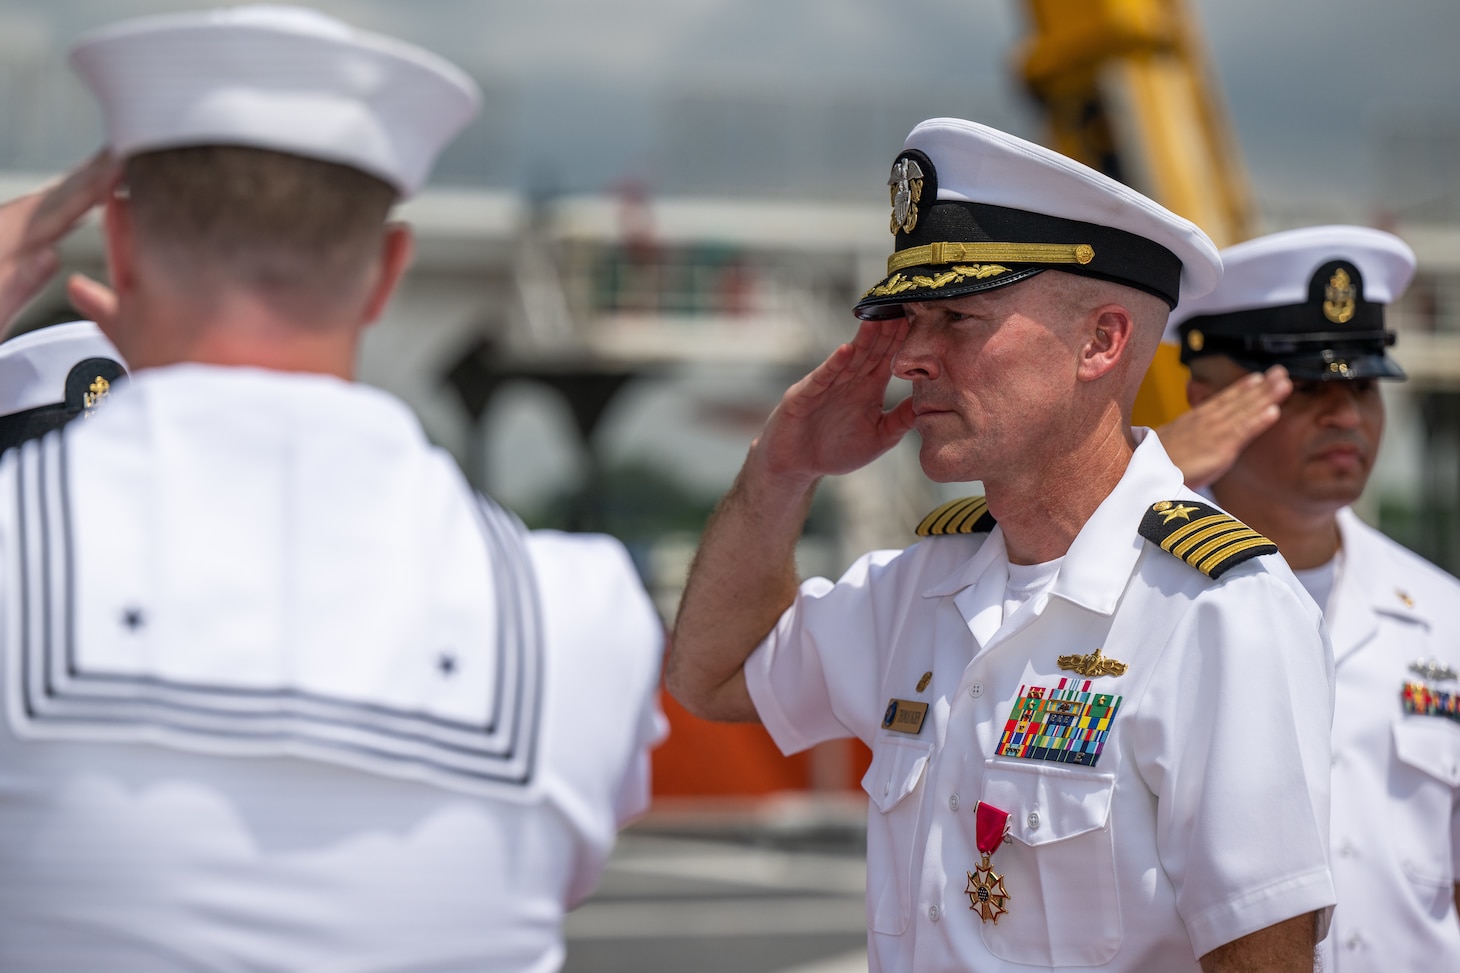 Capt. Tom Ogden departs the change of command ceremony after being relieved by Capt. Tim LaBenz as commodore of Destroyer Squadron (DESRON) 7 aboard the Independence-variant littoral combat ship USS Charleston (LCS 18) in Singapore, Sept. 2, 2022. Charleston, part of DESRON 7, is on a rotational deployment, operating in the U.S. 7th Fleet area of operations to enhance interoperability with partners and serve as a ready-response force in support of a free and open Indo-Pacific region. As the U.S. Navy’s destroyer squadron forward-deployed in Southeast Asia, DESRON 7 serves as the primary tactical and operational commander of littoral combat ships rotationally deployed to Singapore, Expeditionary Strike Group (ESG) 7’s Sea Combat Commander, and builds partnerships through training exercises and military-to-military engagements.